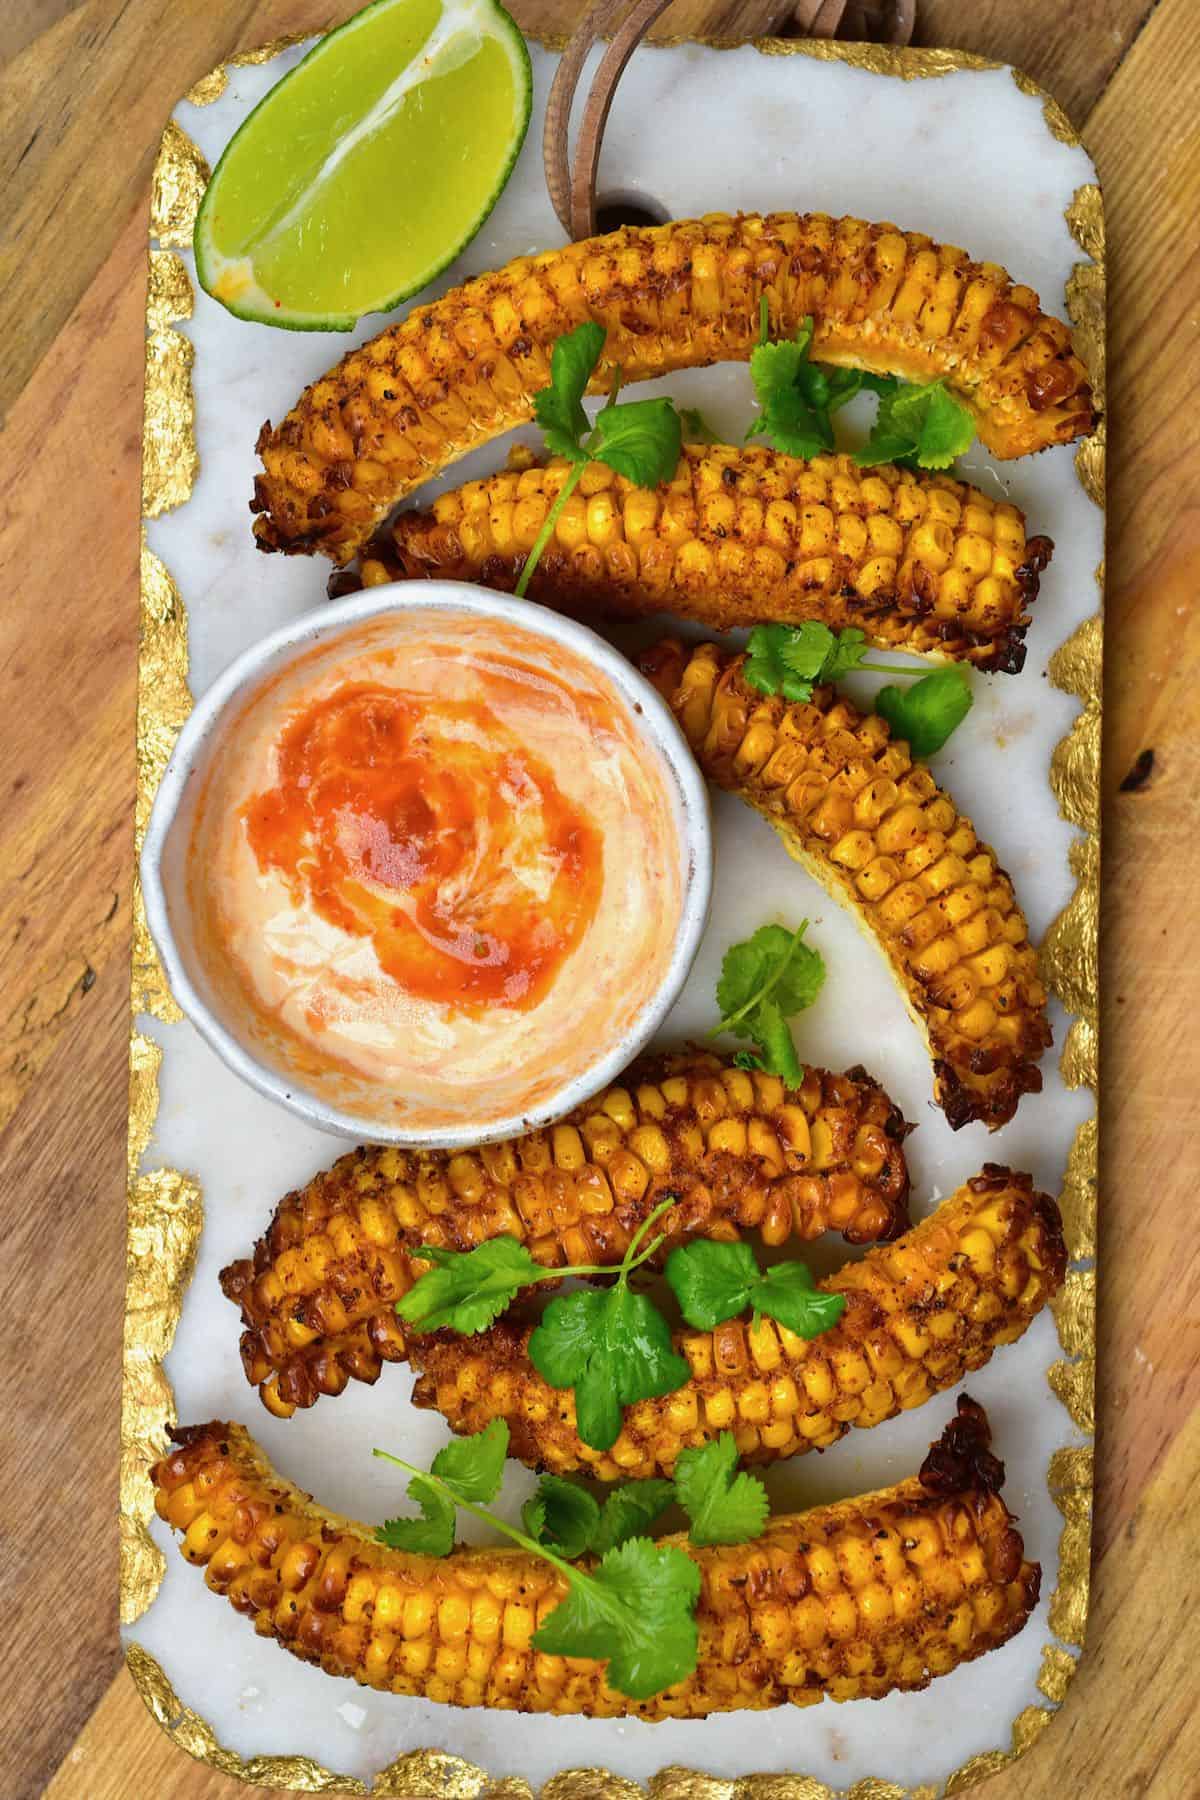 Spicy corn ribs served with chili mayo